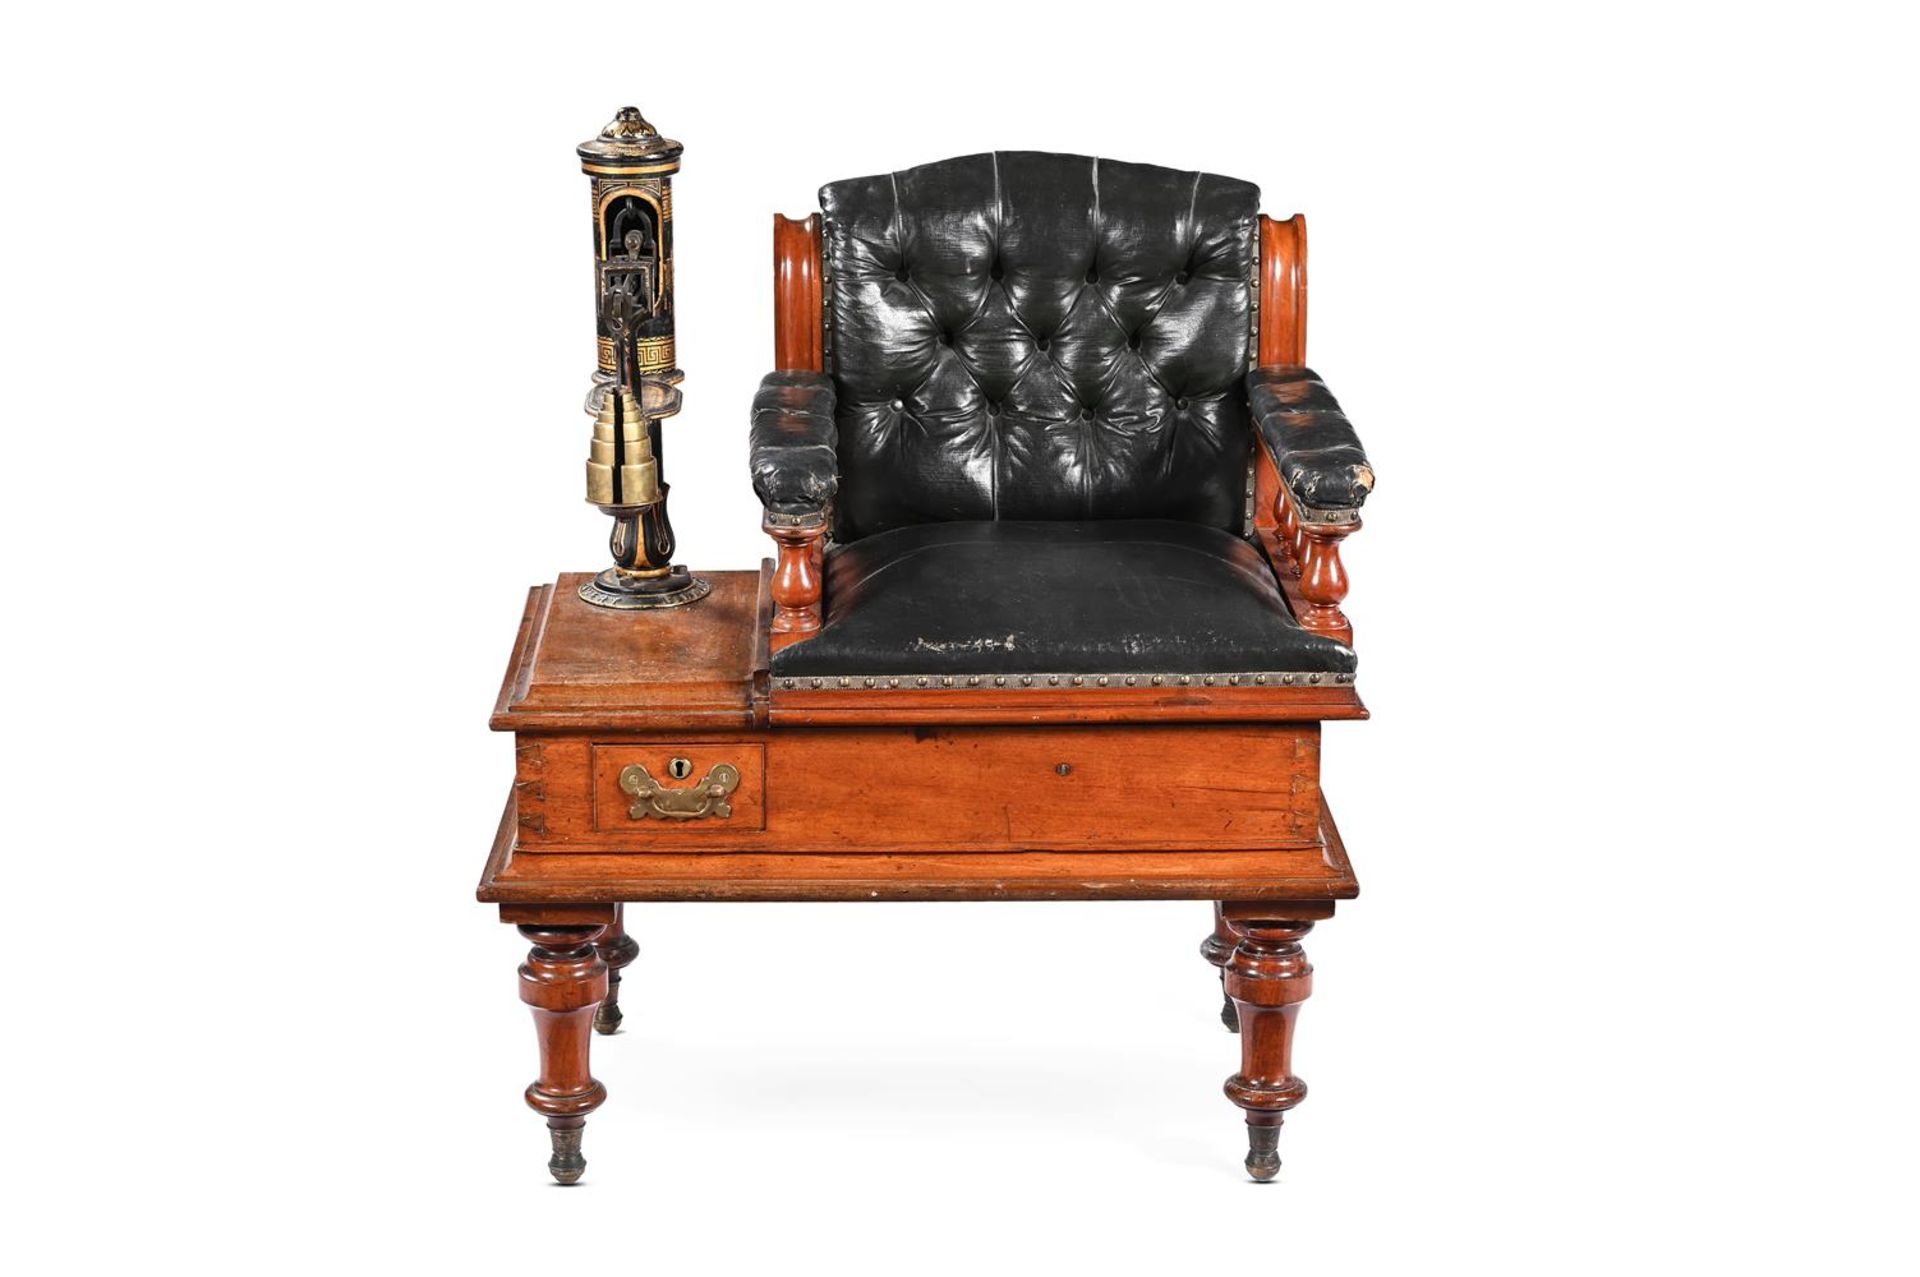 A VICTORIAN MAHOGANY AND BUTTONED LEATHER JOCKEY SCALES CHAIR, BY W & T AVERY, 19TH CENTURY - Image 2 of 2